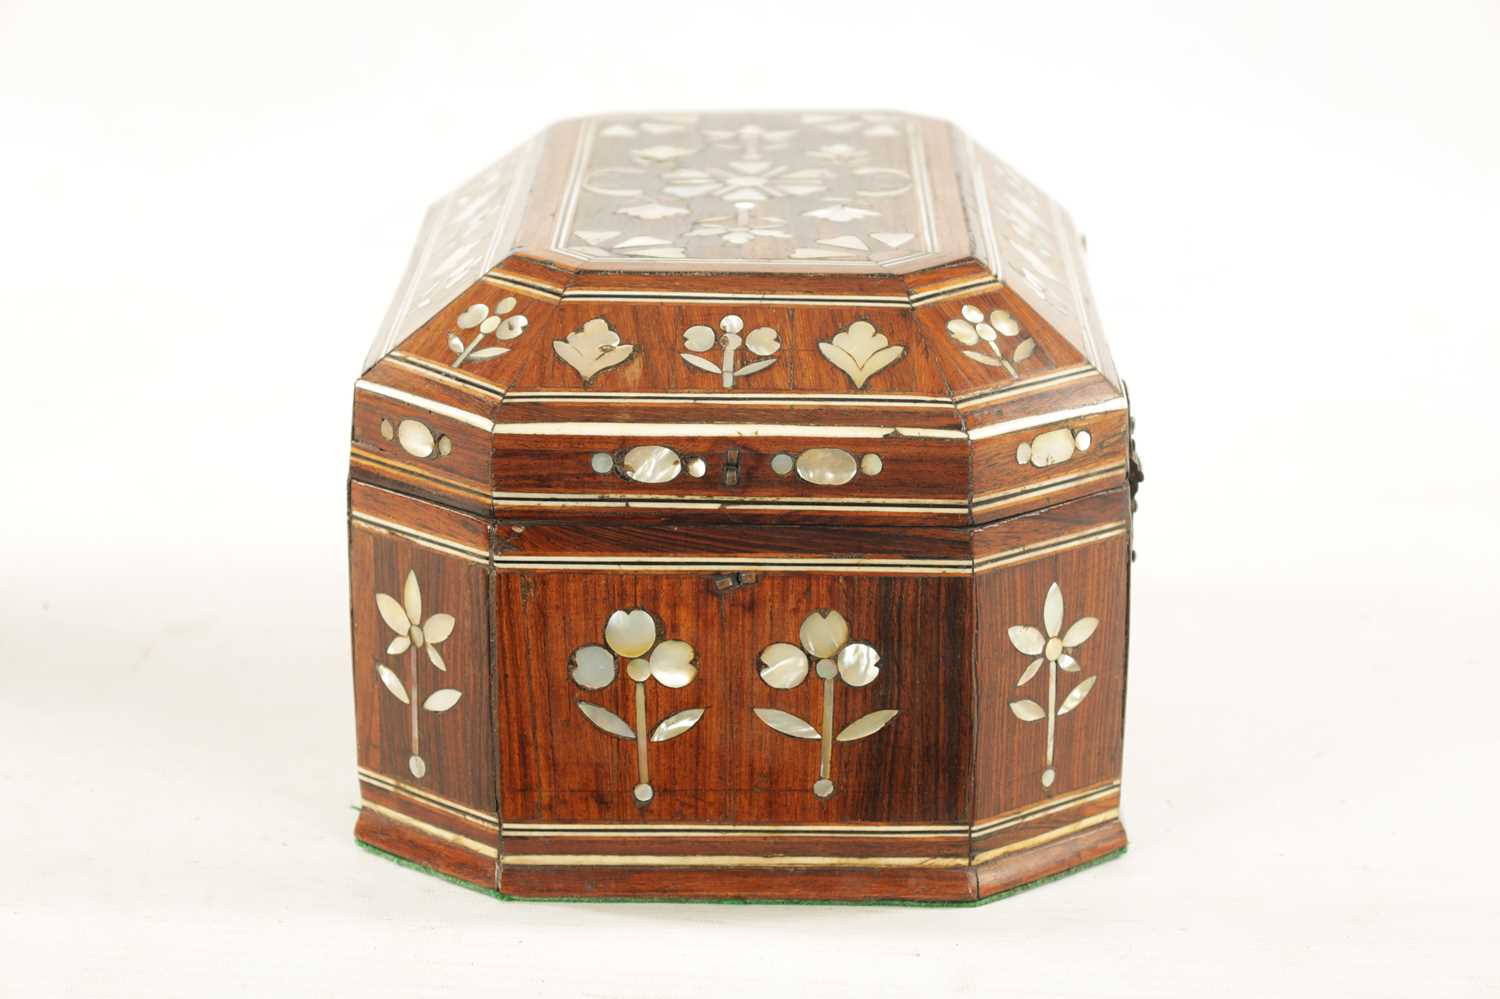 AN EARLY 18TH CENTURY SOUTH AMERICAN MOTHER OF PEARL INLAID BOX - Image 7 of 9